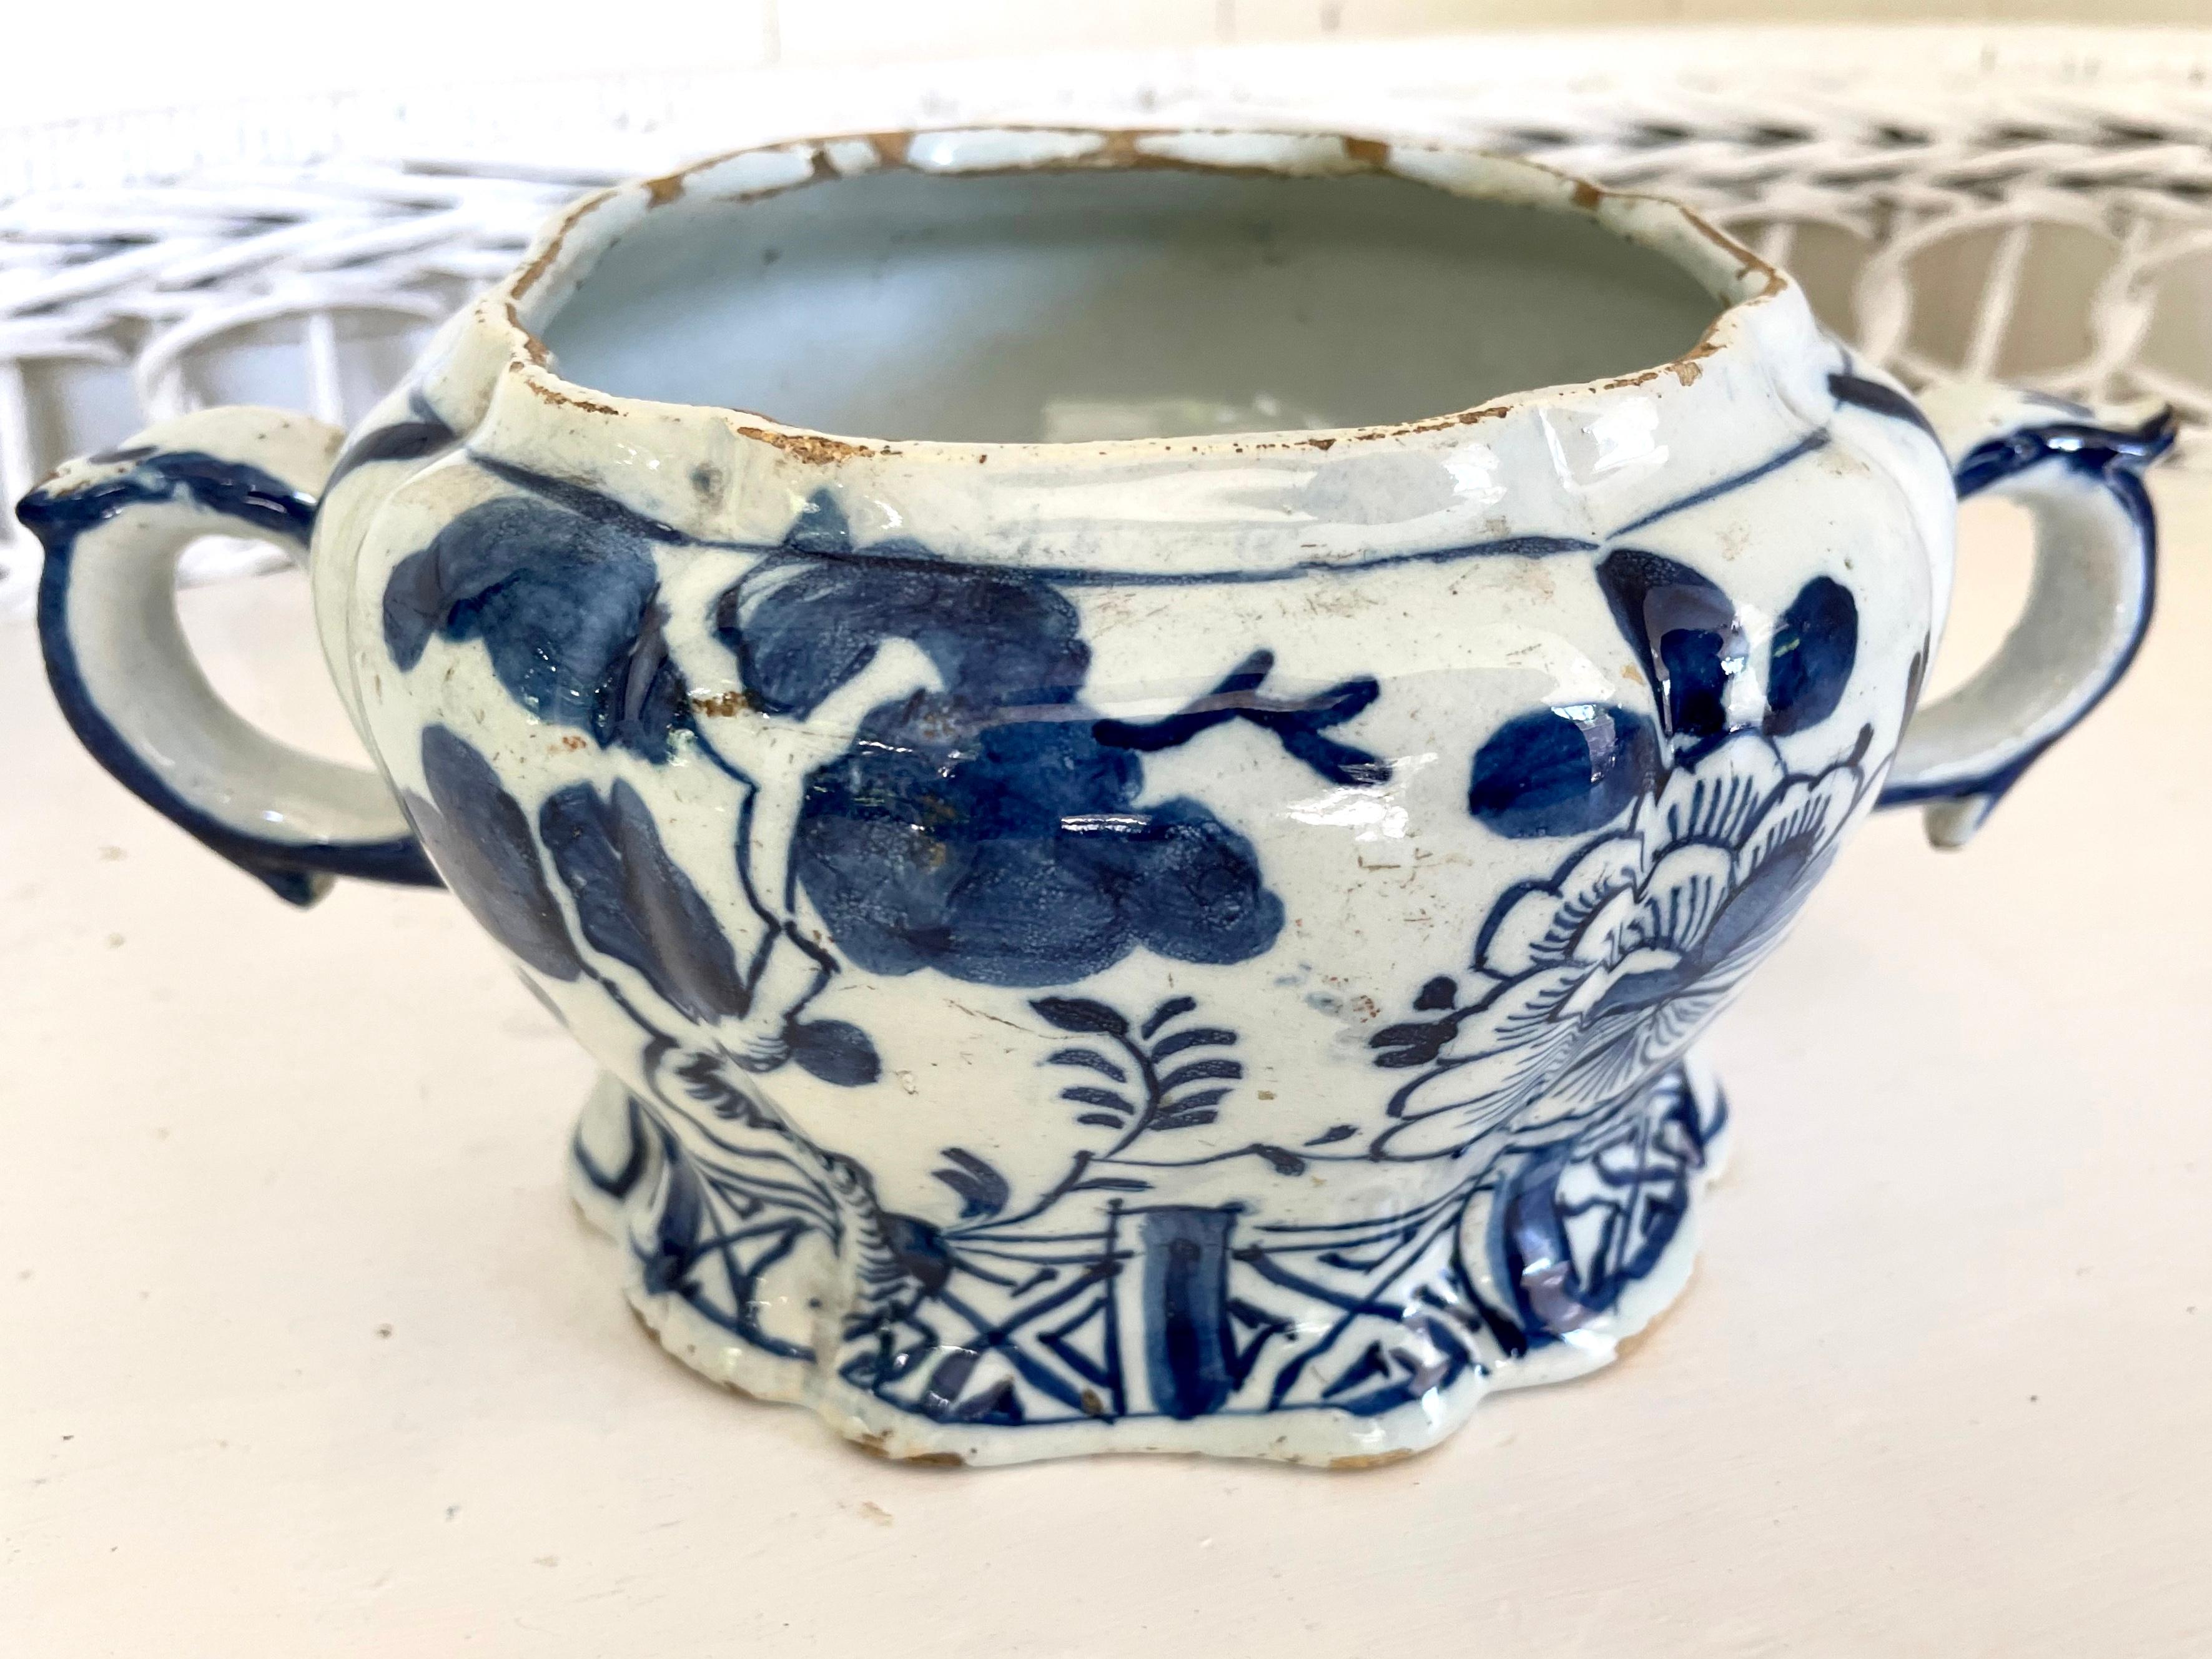 Blue and white Delft handled chinoiserie vase. Antique Dutch porcelain vase with rich blue flowers and chinoiserie fencing in a lustrous glaze; with scrolled handles at side on shaped footed base. Cracks in base and small chips do not detract from